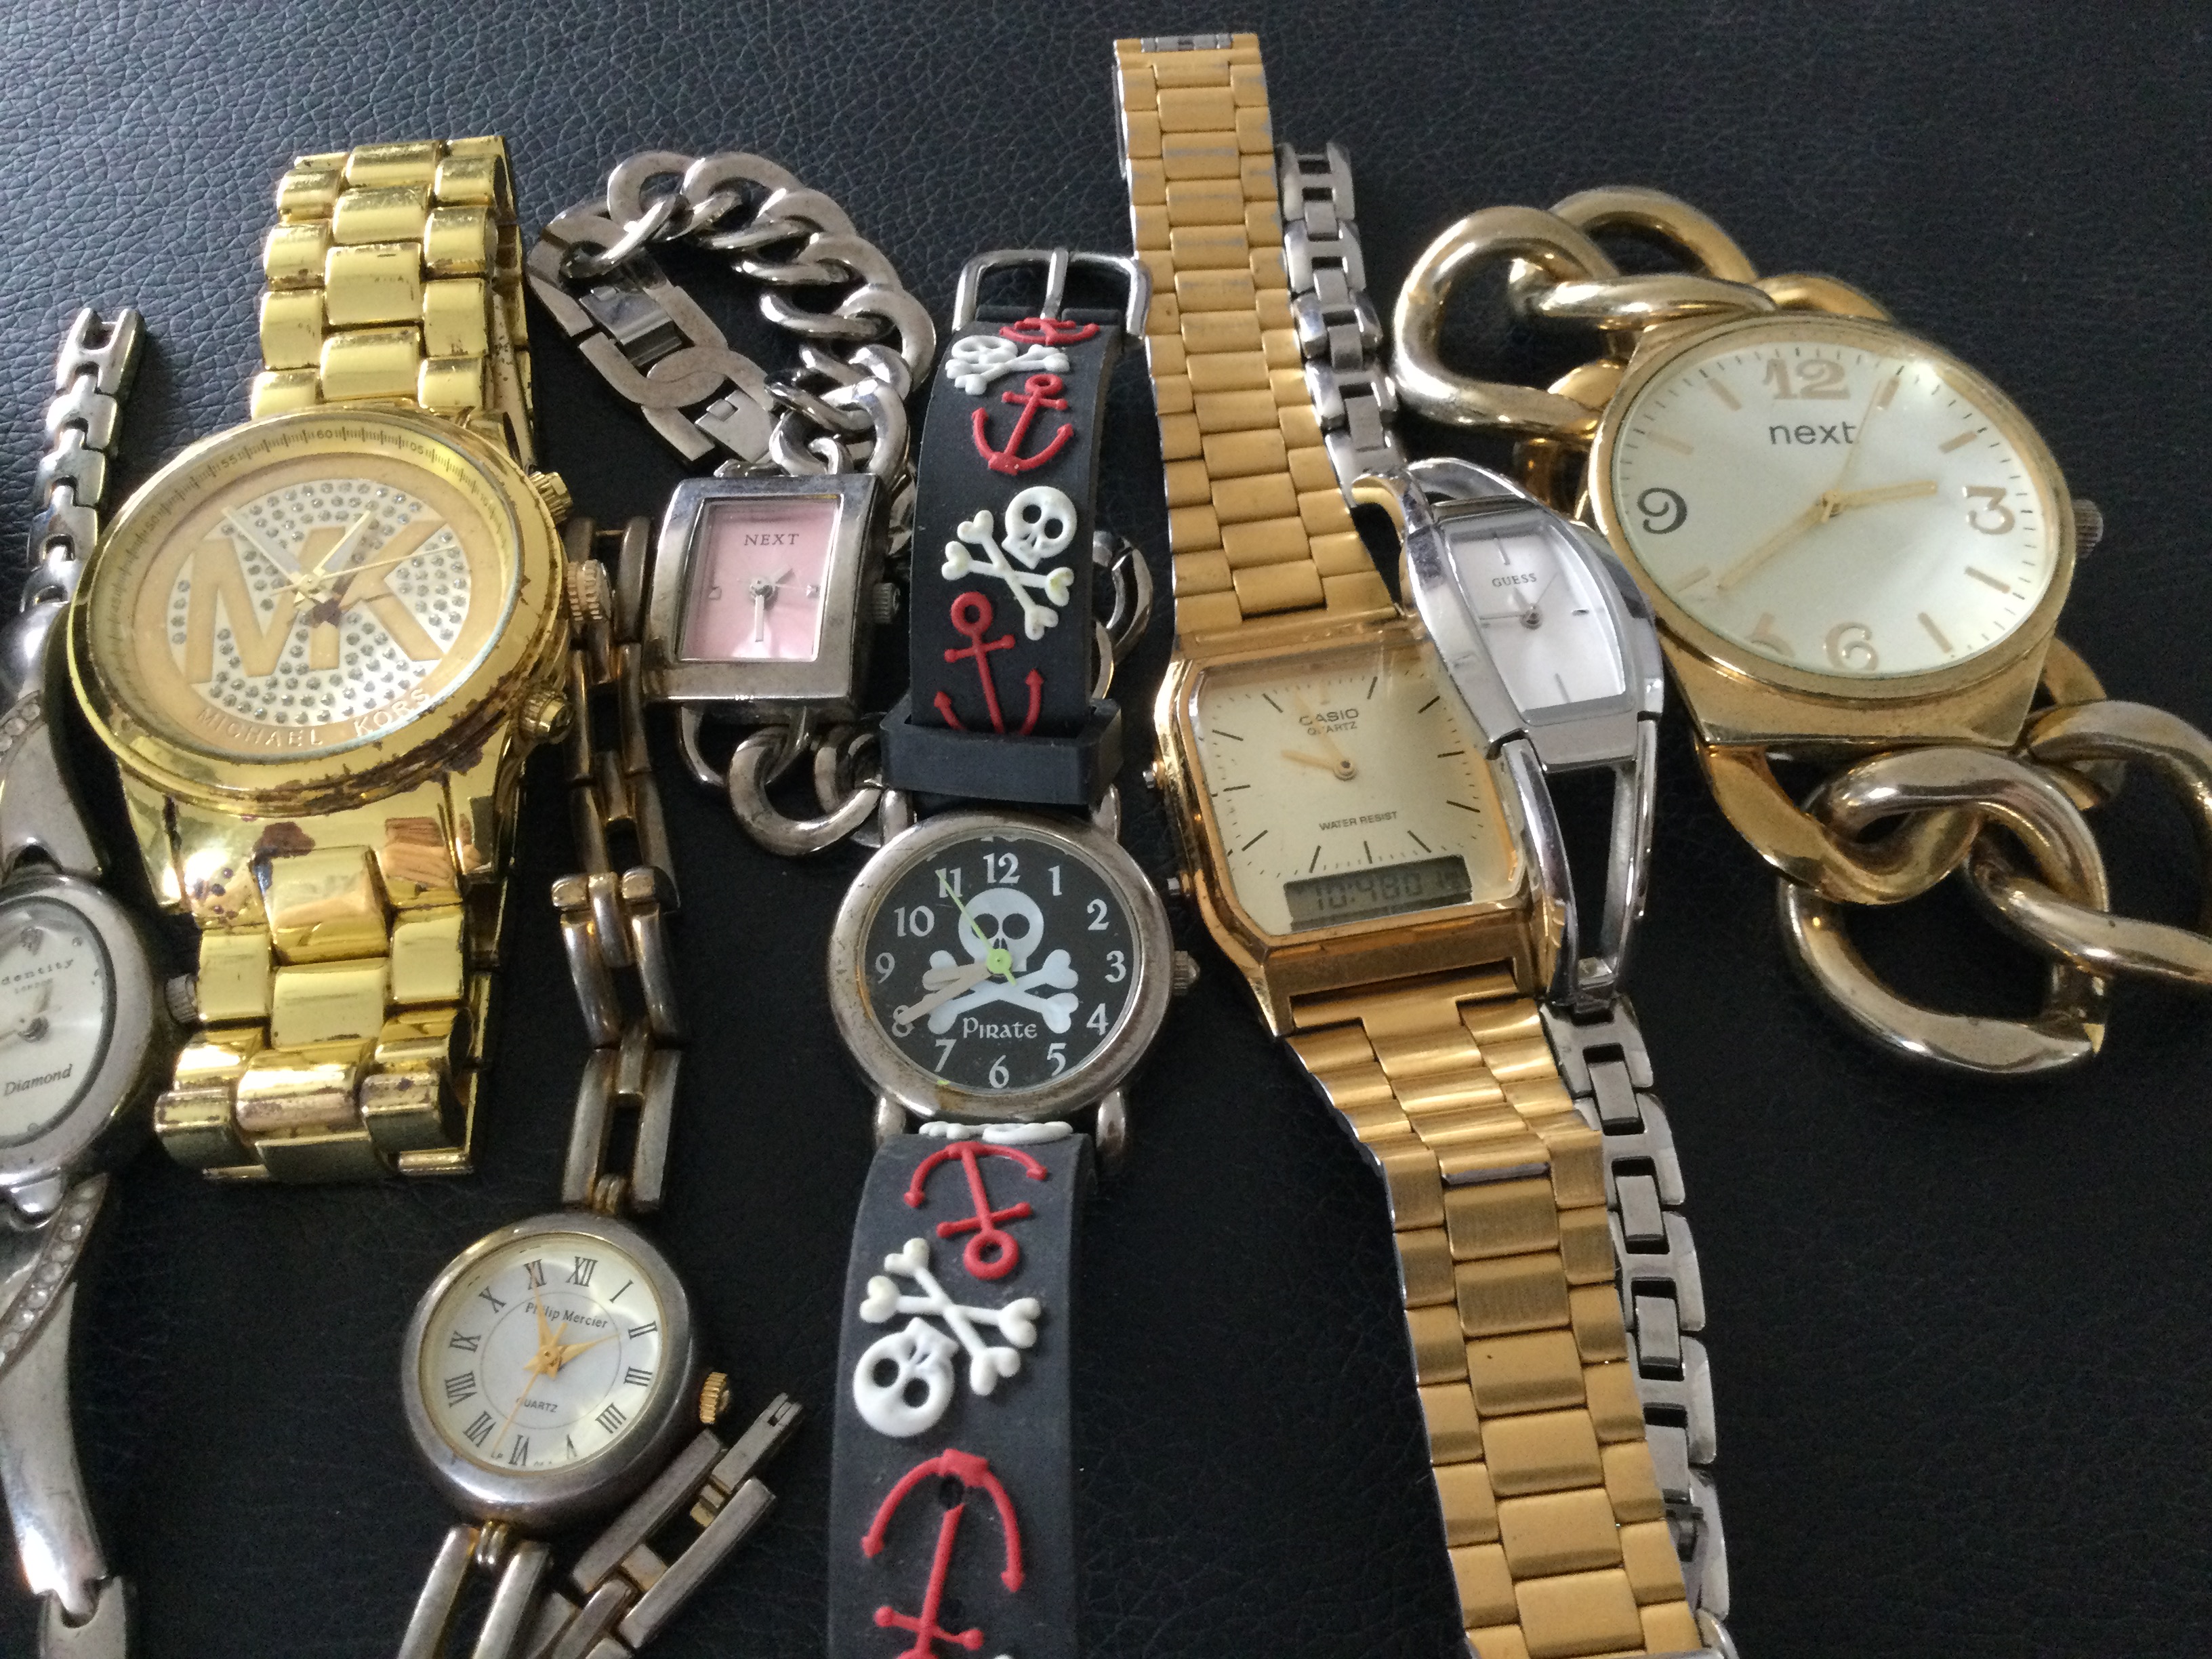 Collection of 10 Watches, Casio, MK, Next, Guess, Identity Diamond Etc (GS 25) A super - Image 3 of 5